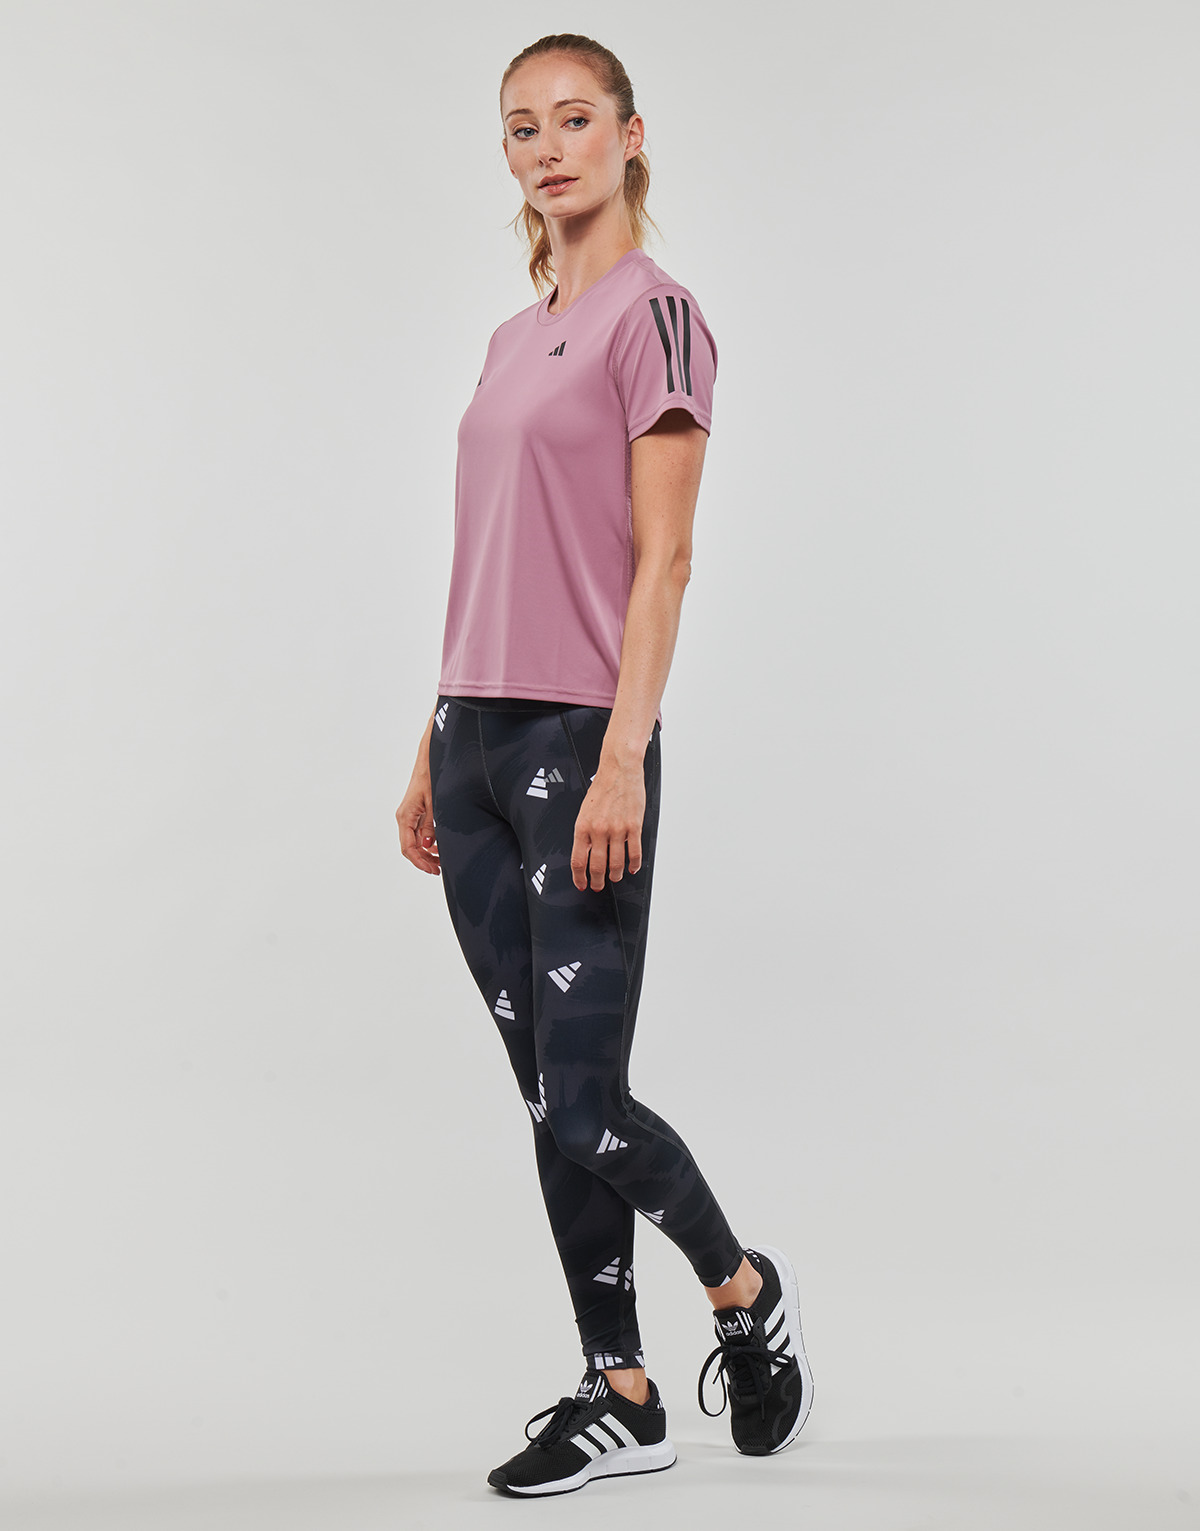 adidas Performance Violet OWN THE RUN TEE mWGx59dX